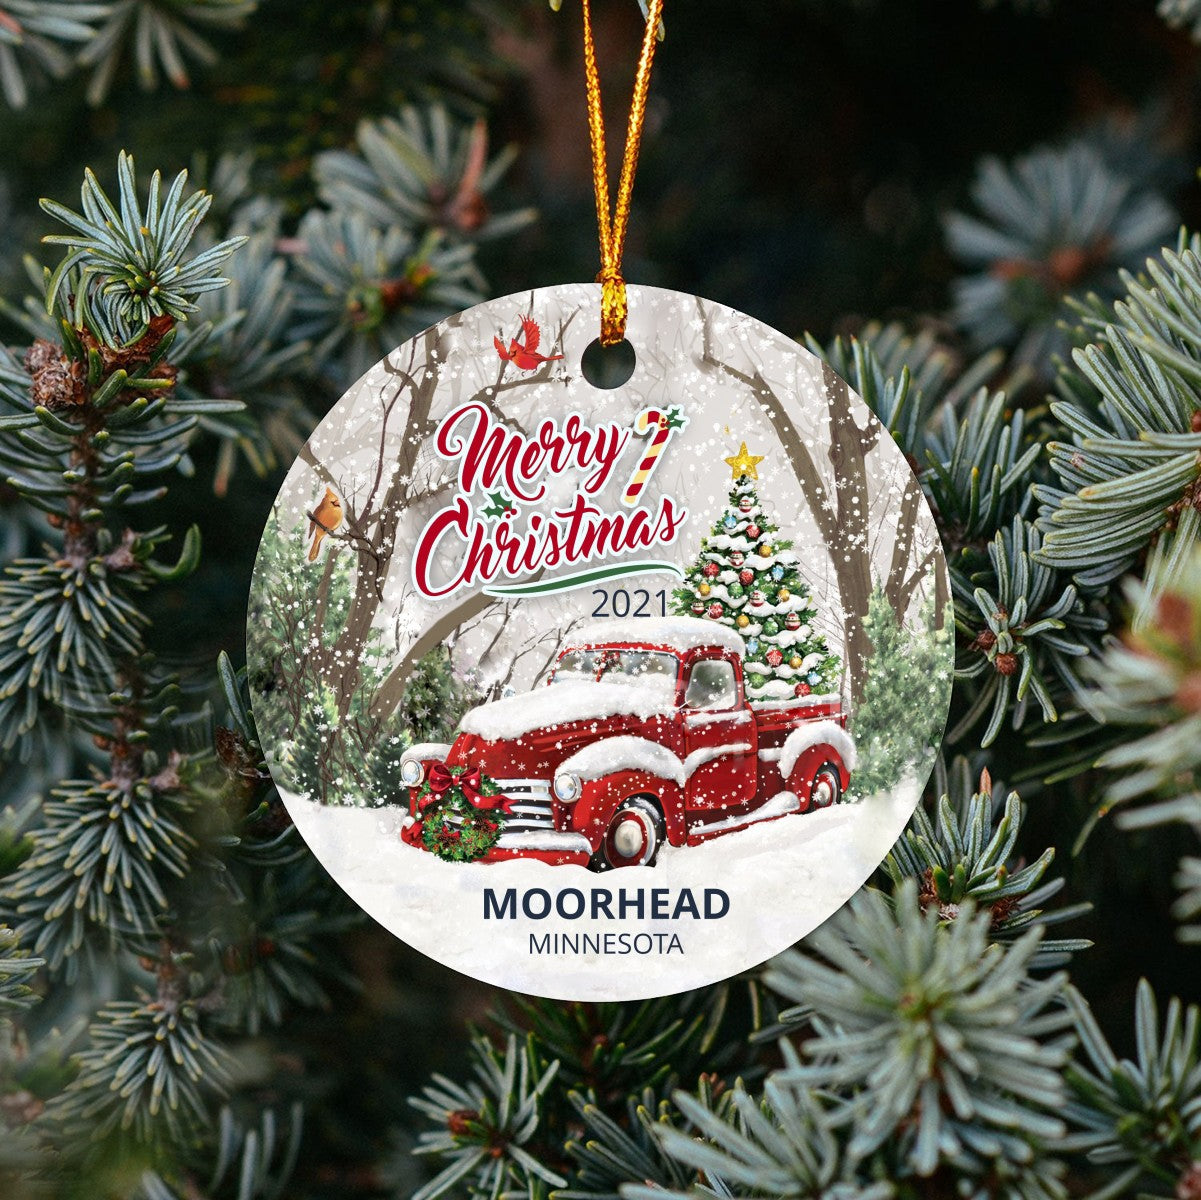 Christmas Tree Ornaments Moorhead - Ornament Customize With Name City And State Moorhead Minnesota MN - Red Truck Xmas Ornaments 3'' Plastic Gift For Family, Friend And Housewarming